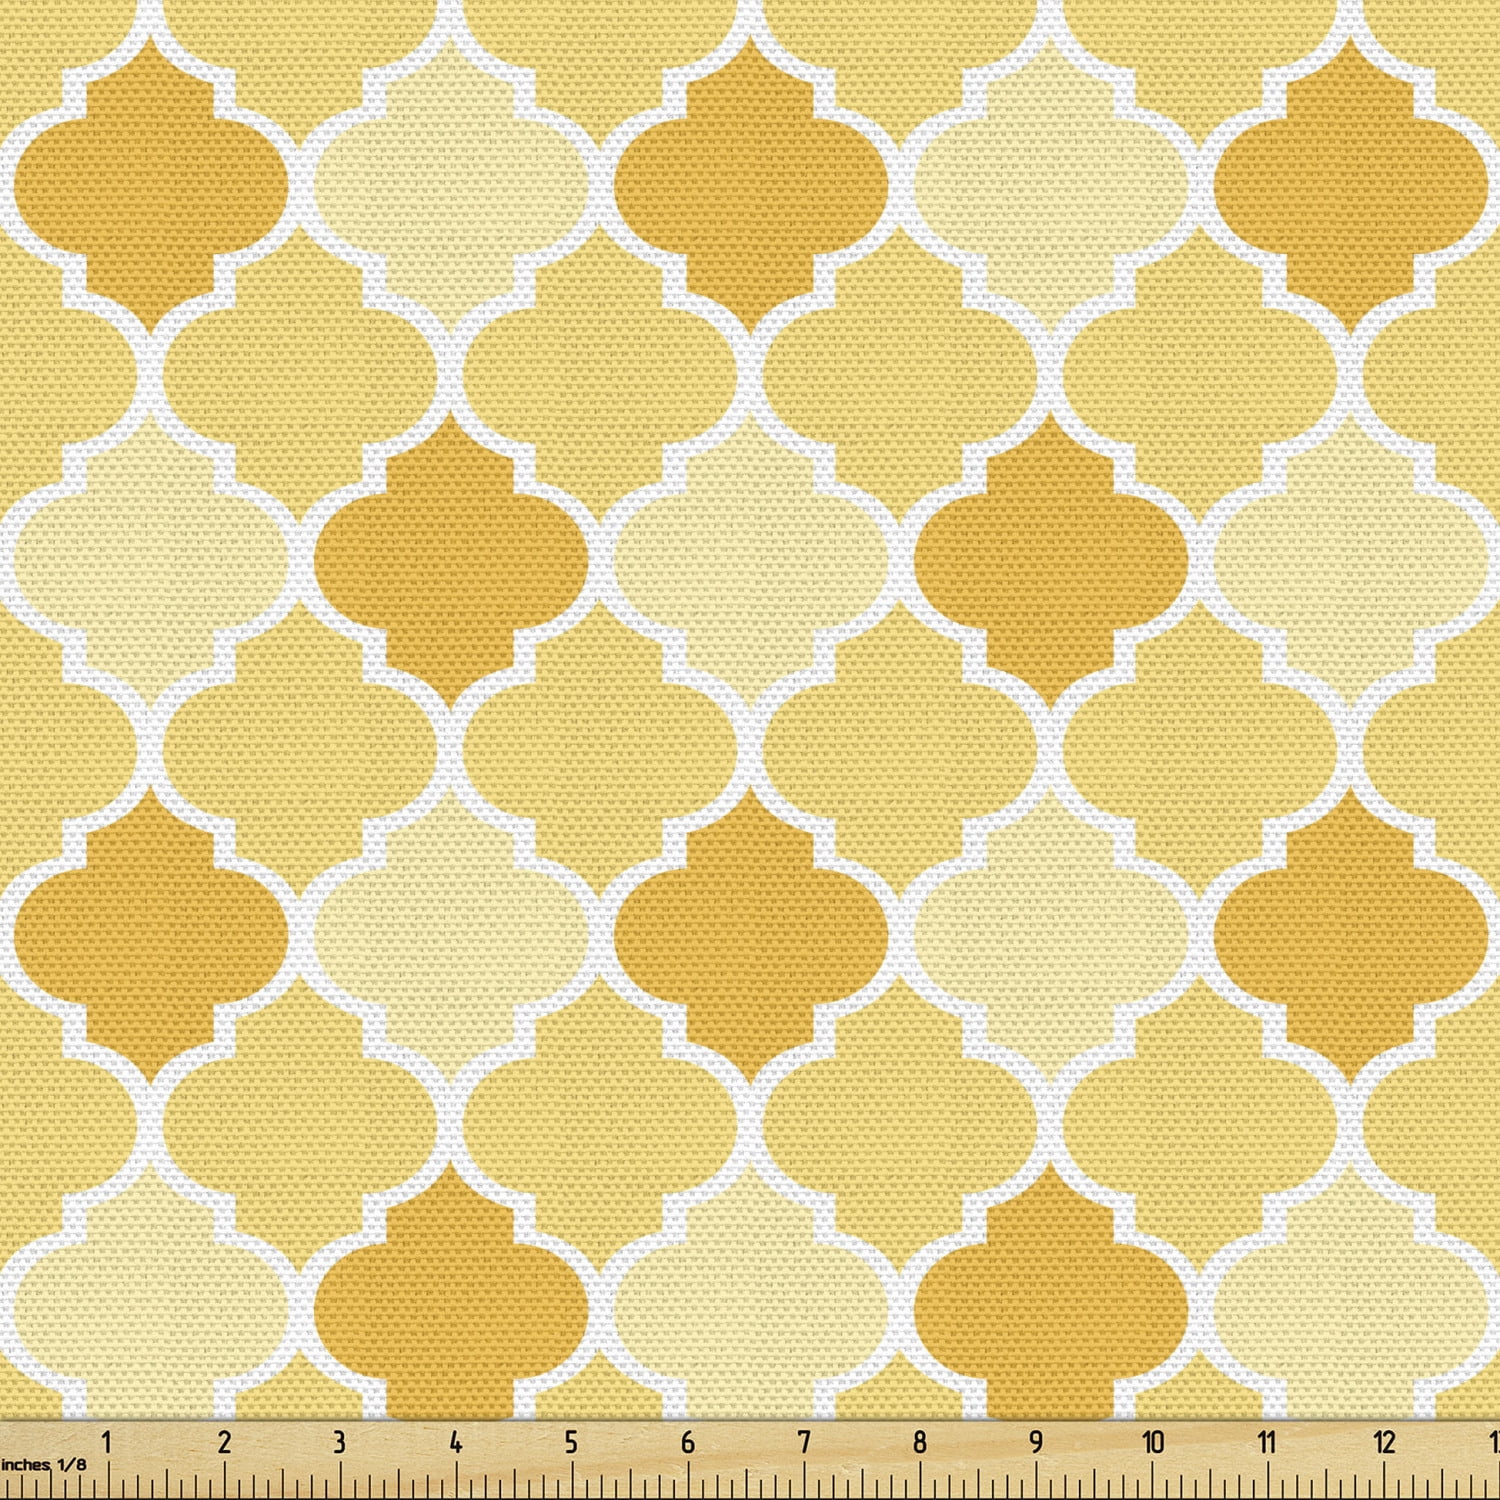 Choose Your Size Trellis Pattern in yellow with white 100% Cotton Fabric Homemade in Texas Sunny Set of 2 Print Napkins Hemmed Squares